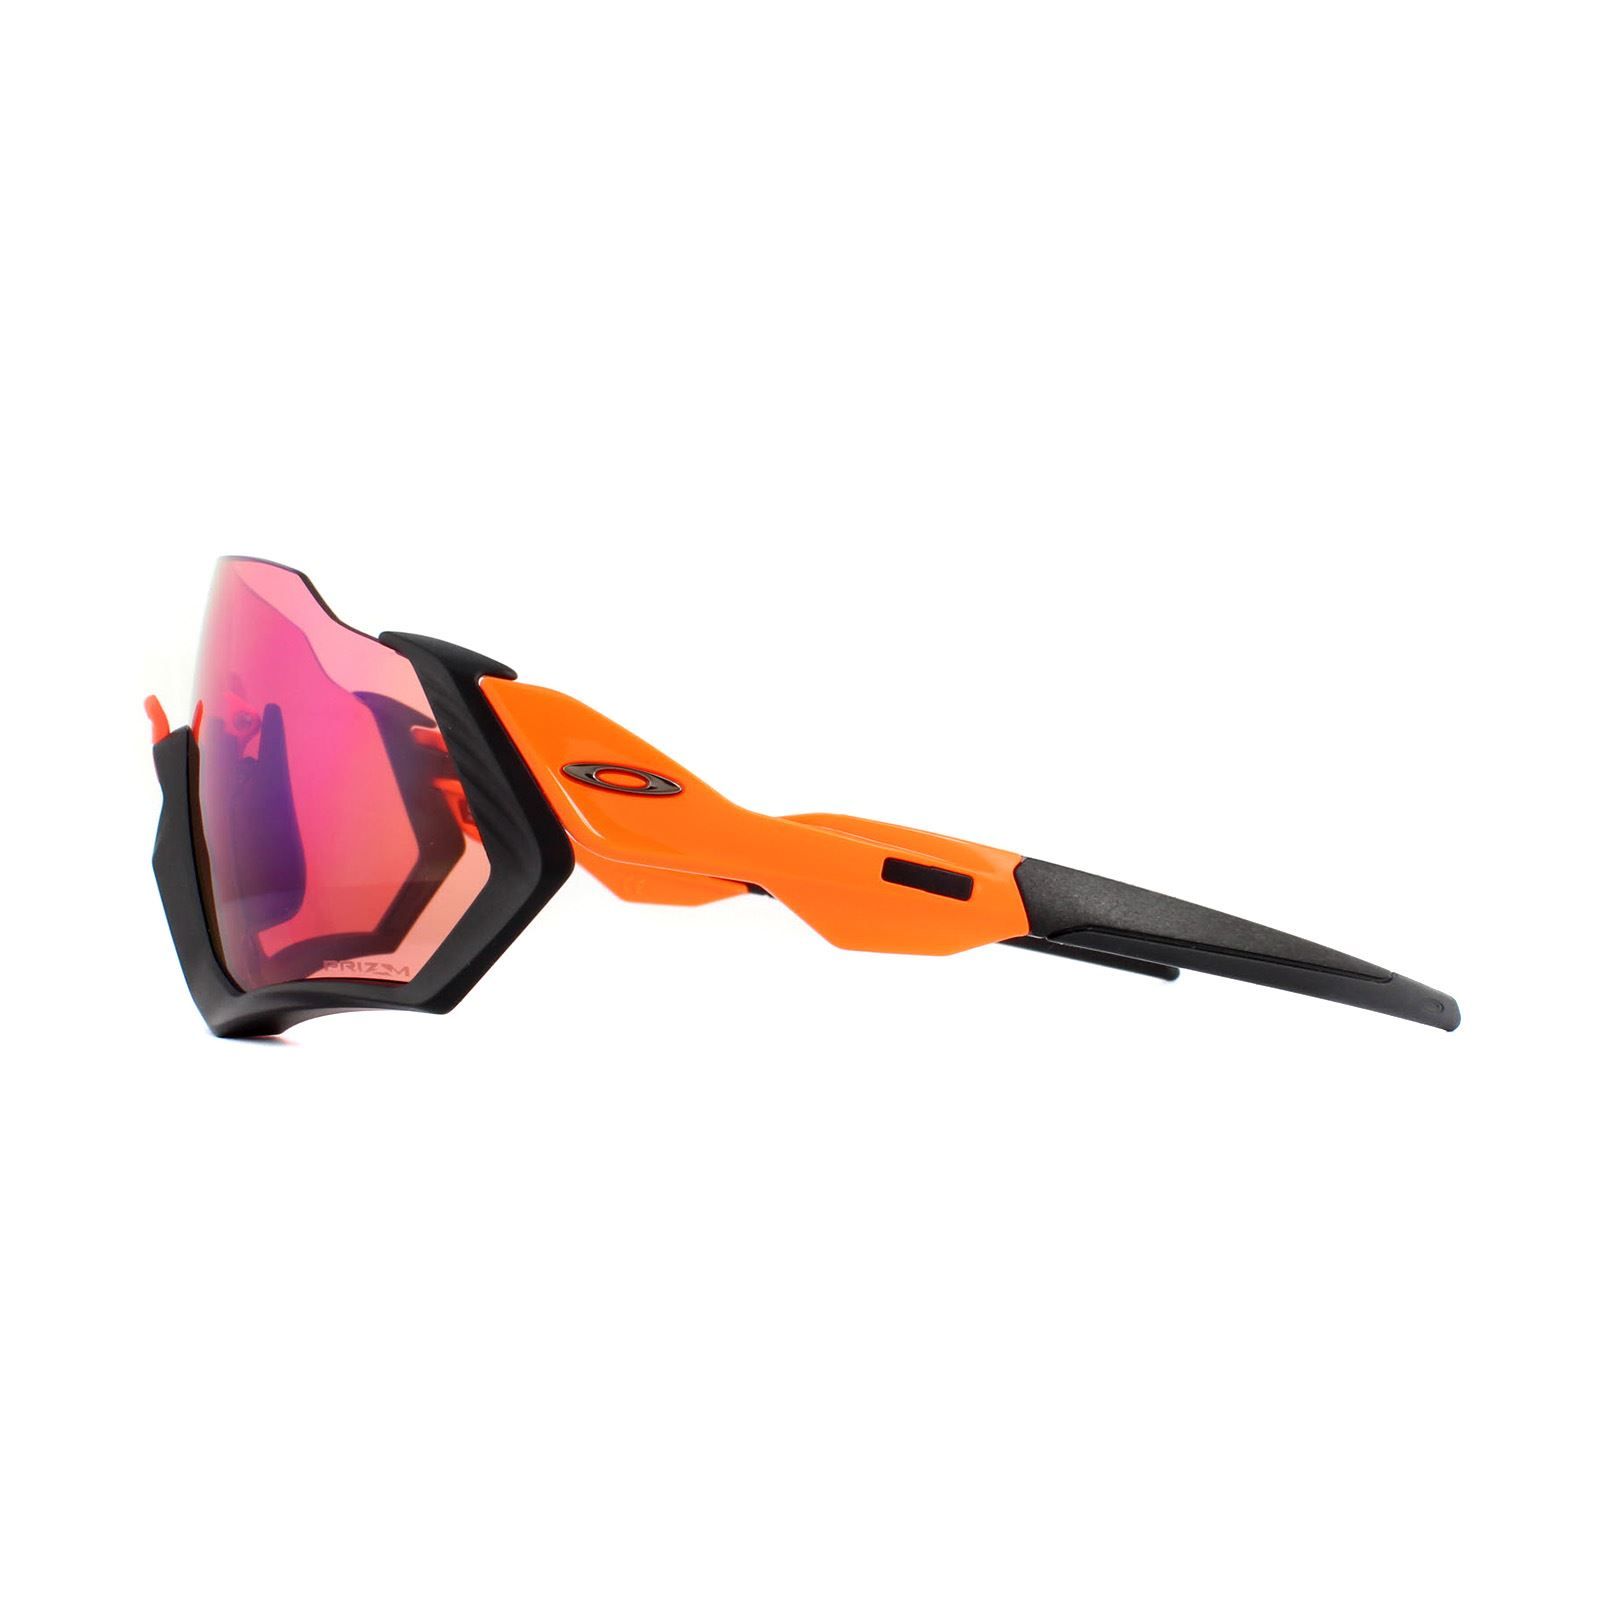 Oakley Sunglasses Flight Jacket OO9401-04 Matte Black Prizm Trail are a lightweight model made of plastic, ideal for cycling, running and beyond - durability and all-day comfort of lightweight O-Matterâ„¢ frame material, frame suitable for medium to large faces